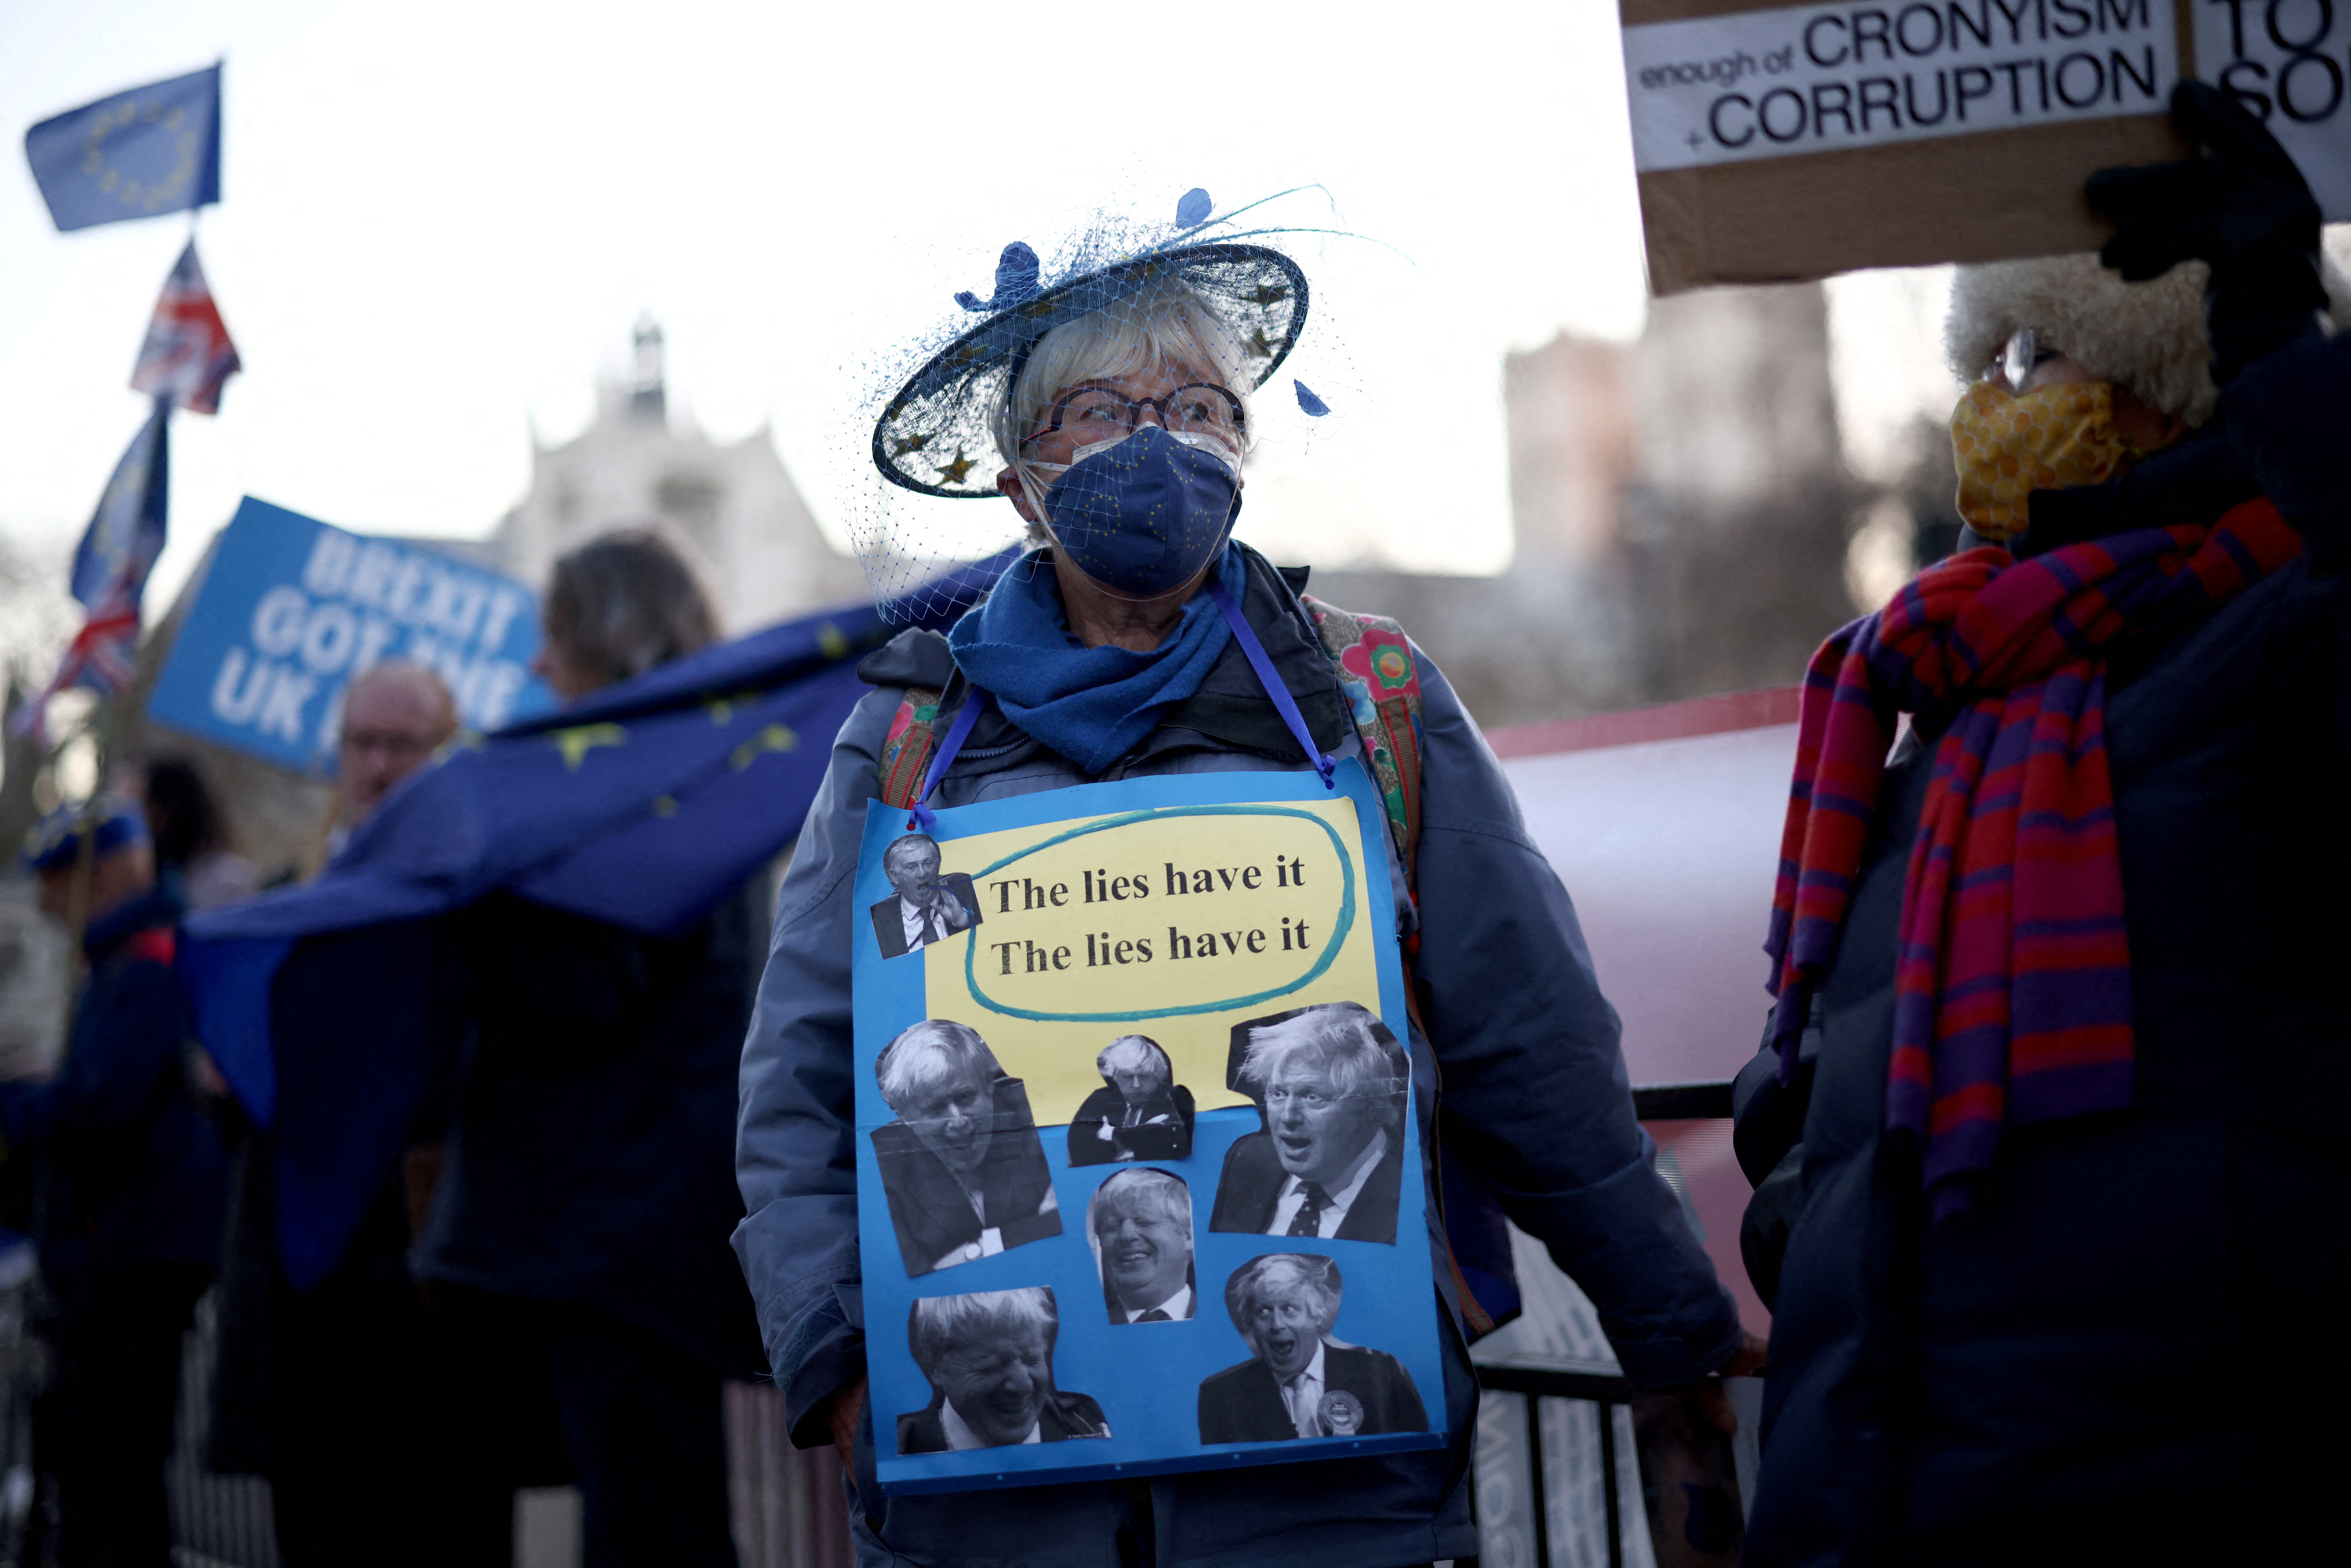 People gather in protest against the Conservative Party in London, Britain, January 12, 2022. REUTERS/Henry Nicholls